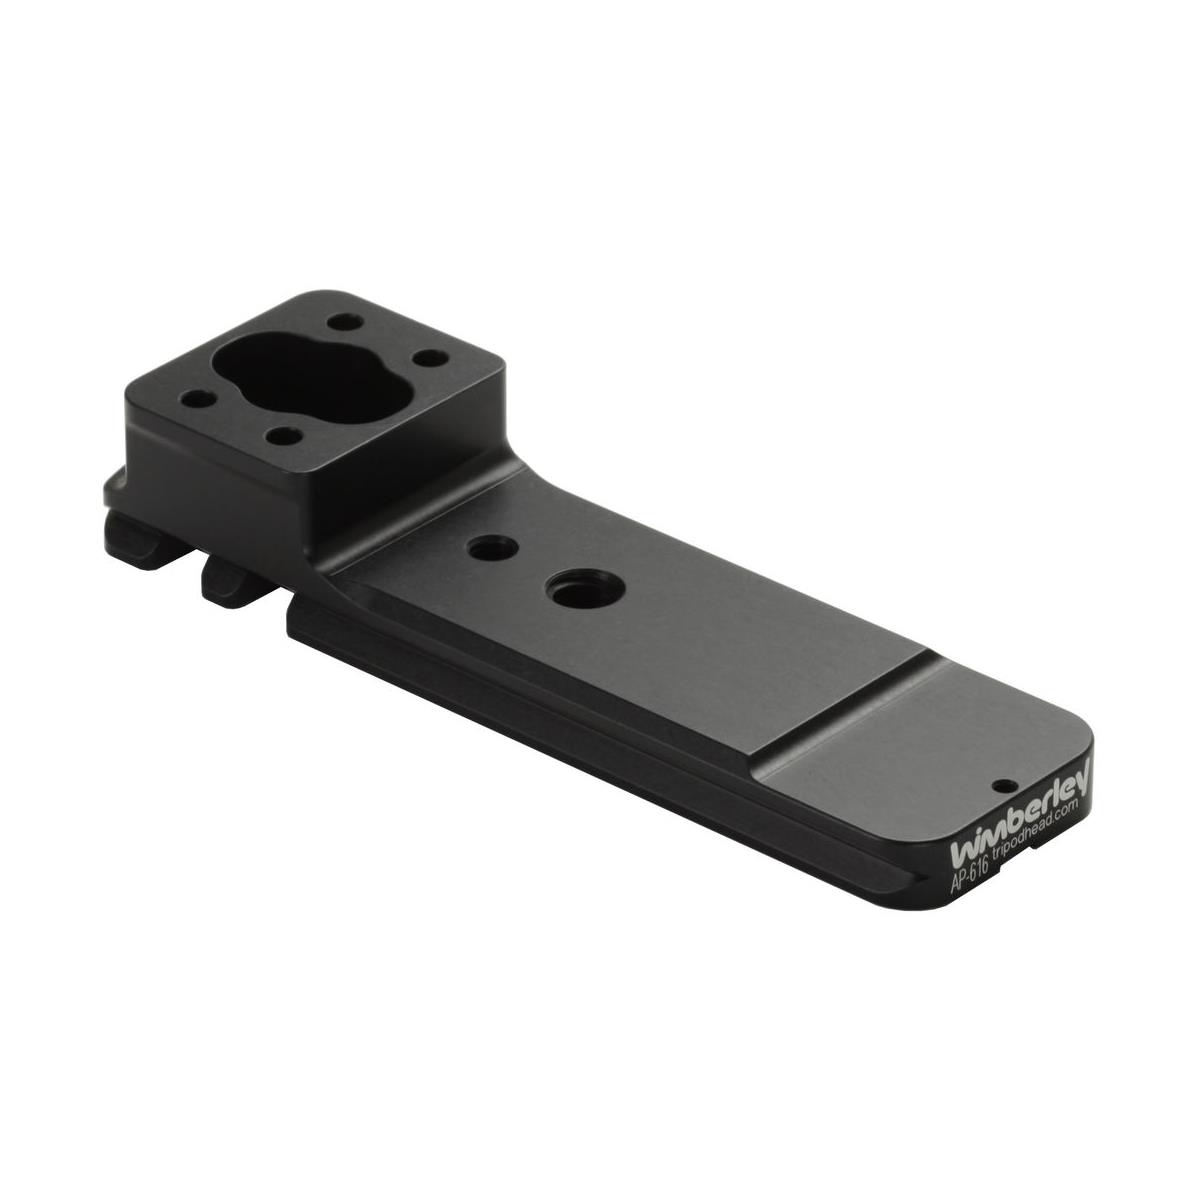 Wimberley AP-616 Replacement Foot for  Sony 600 f/4.0 GM OSS